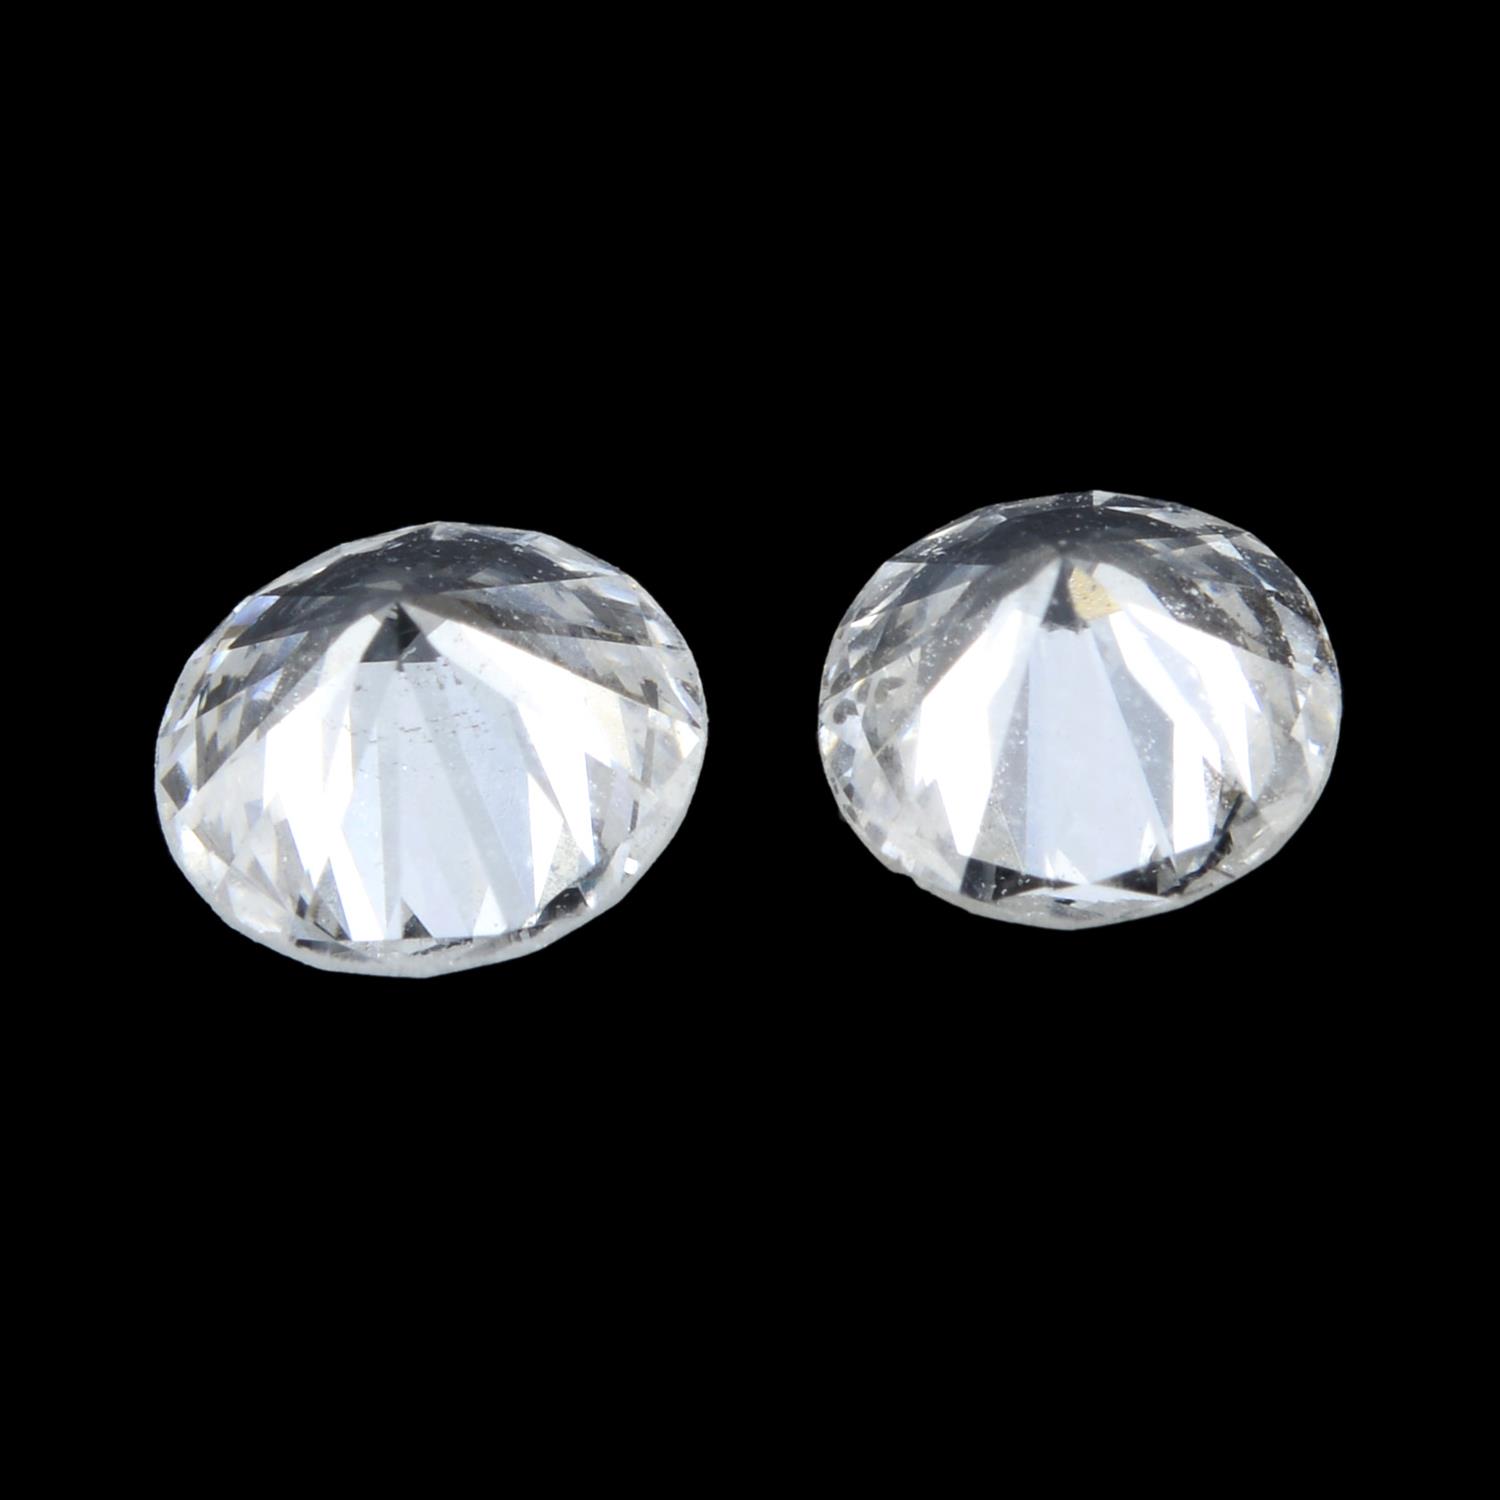 Pair of brilliant cut diamonds weighing 0.53ct - Image 2 of 2